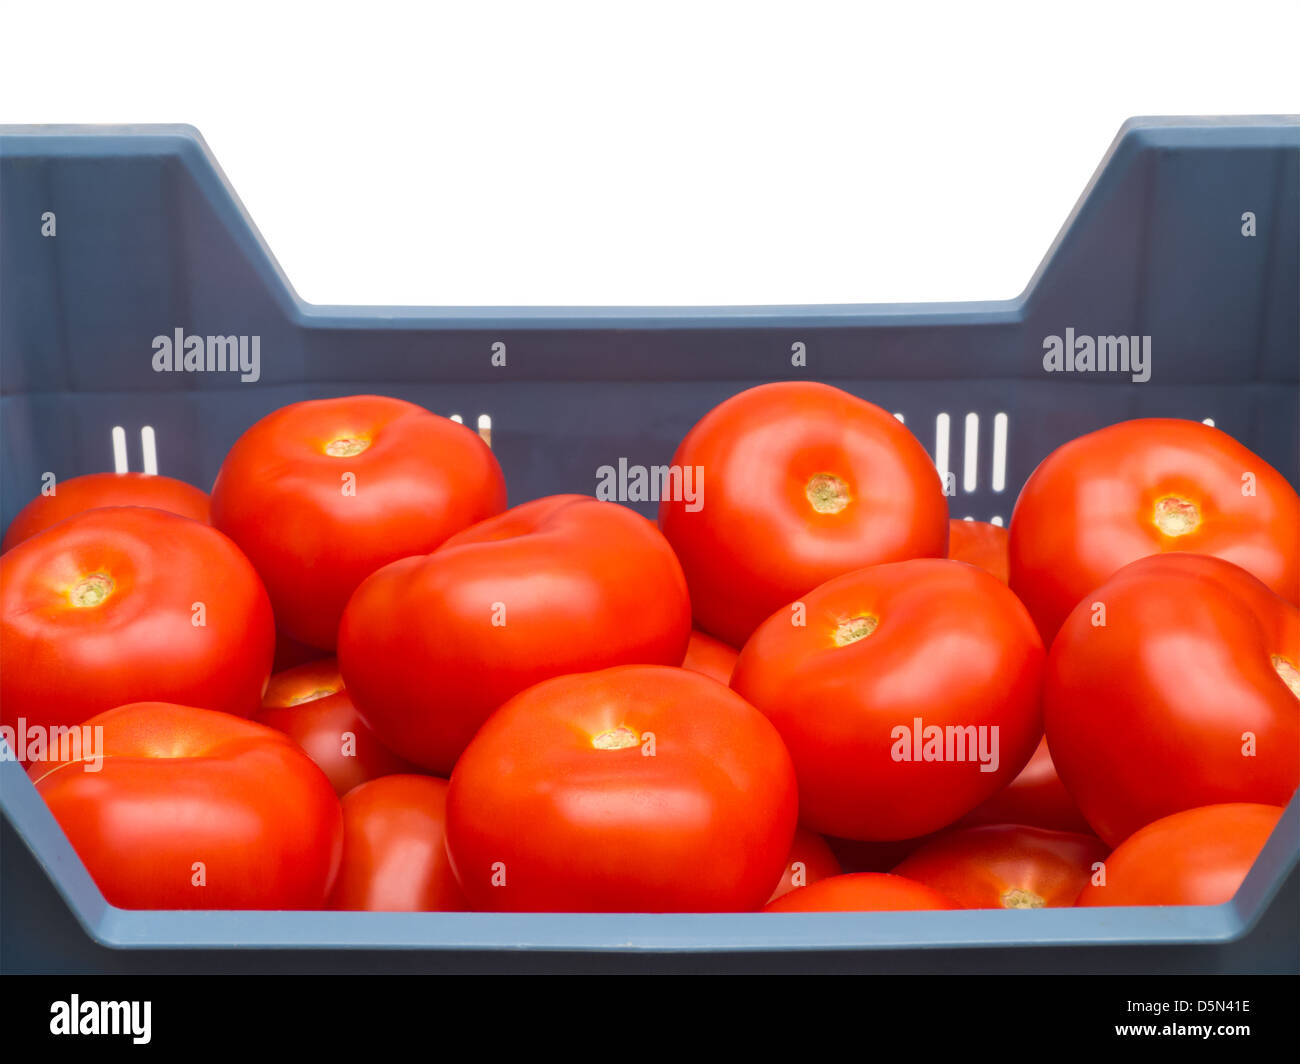 Tomatoes in Container Stock Photo